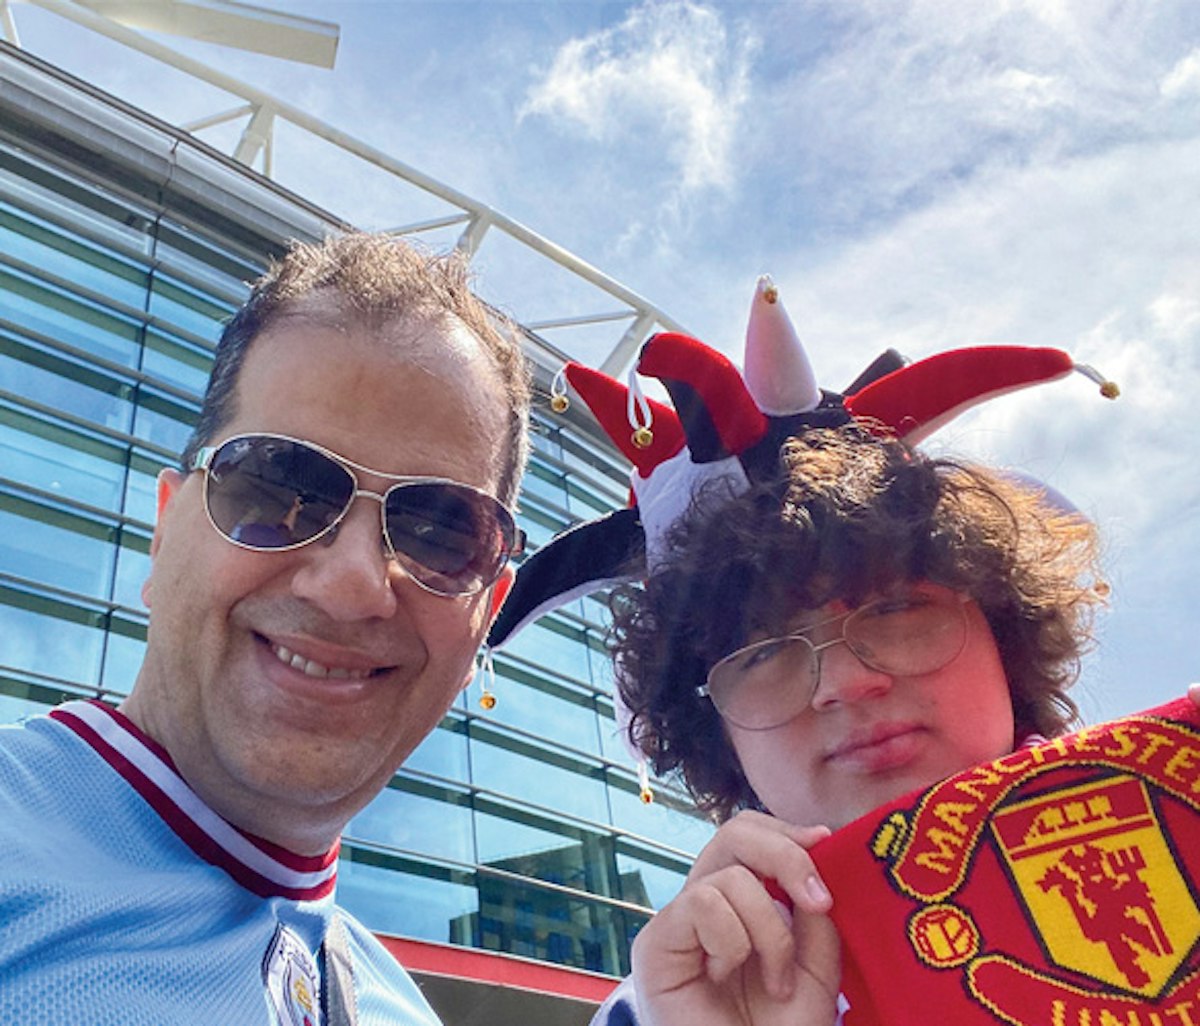 Two soccer fans posing for a selfie, one wearing a jester hat and holding a manchester united scarf.